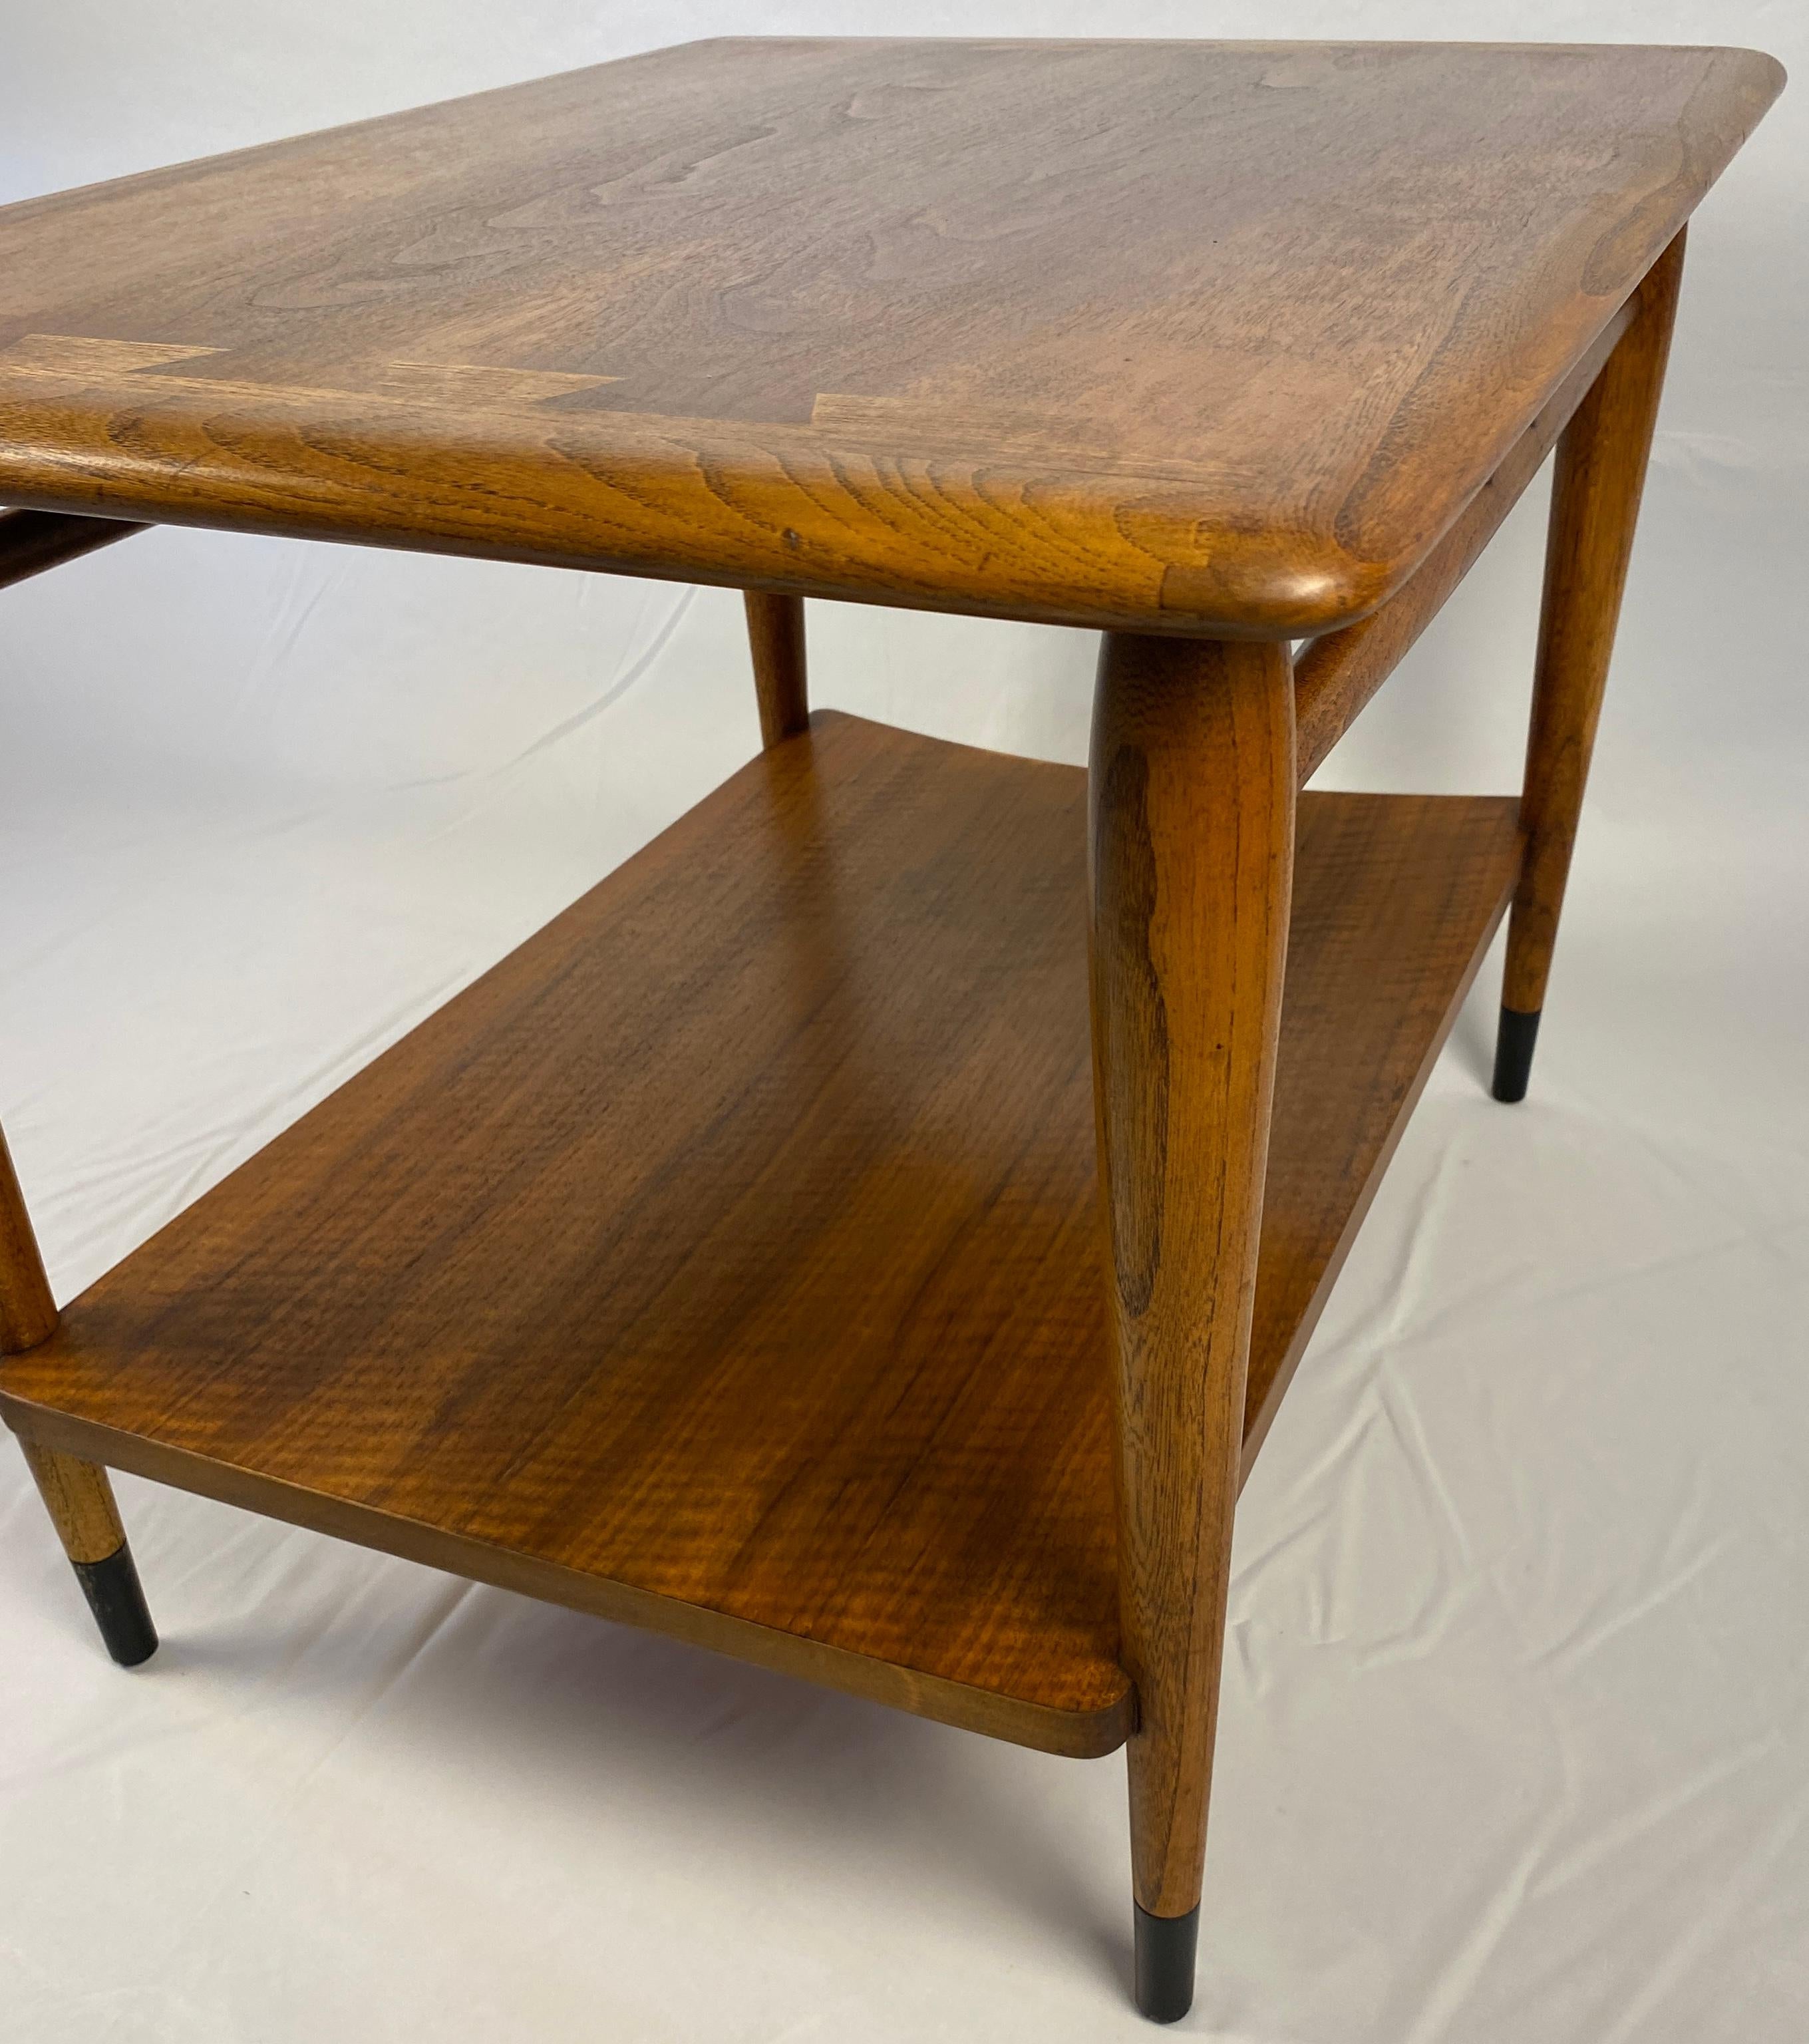 Mid-Century Modern Scandinavian Style Wooden Coffee Table or End Table with Bottom Shelf For Sale